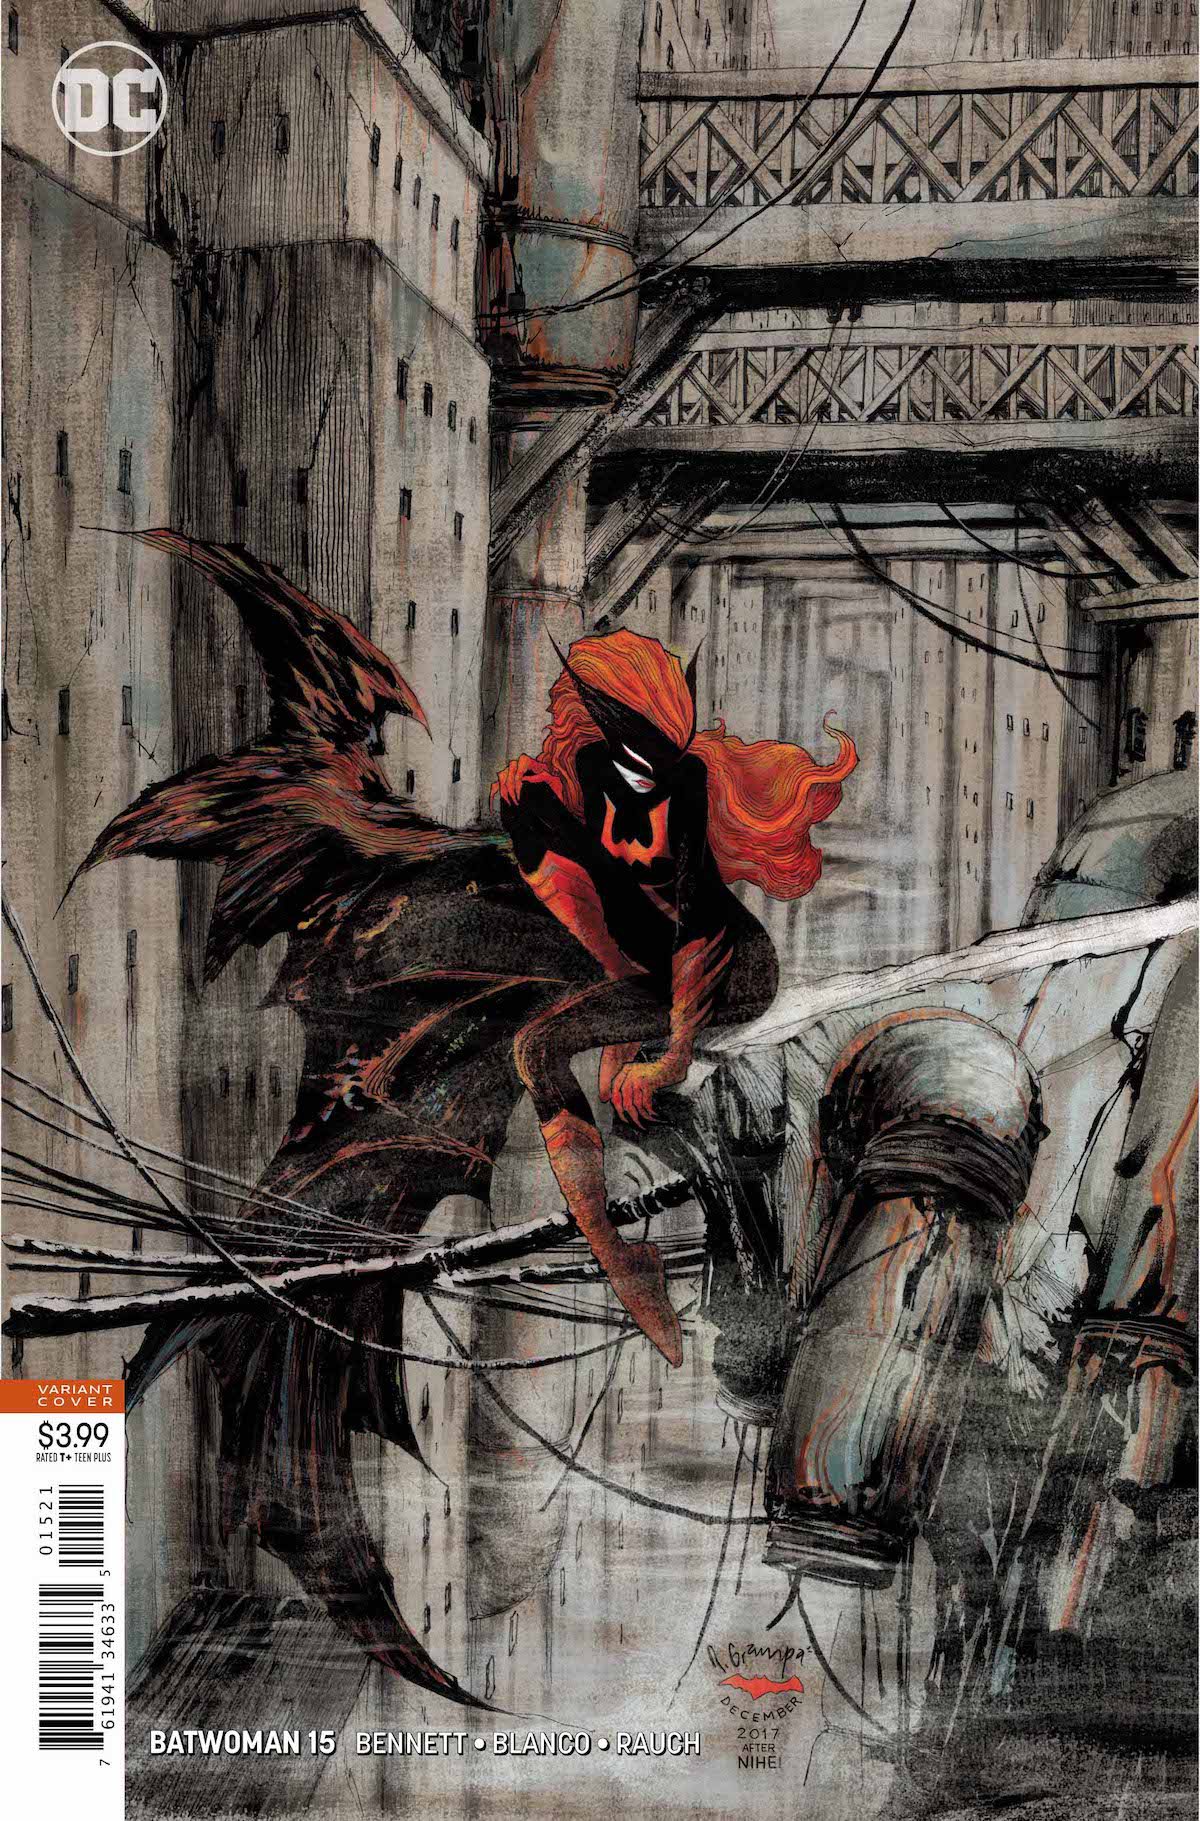 Batwoman #15 variant cover